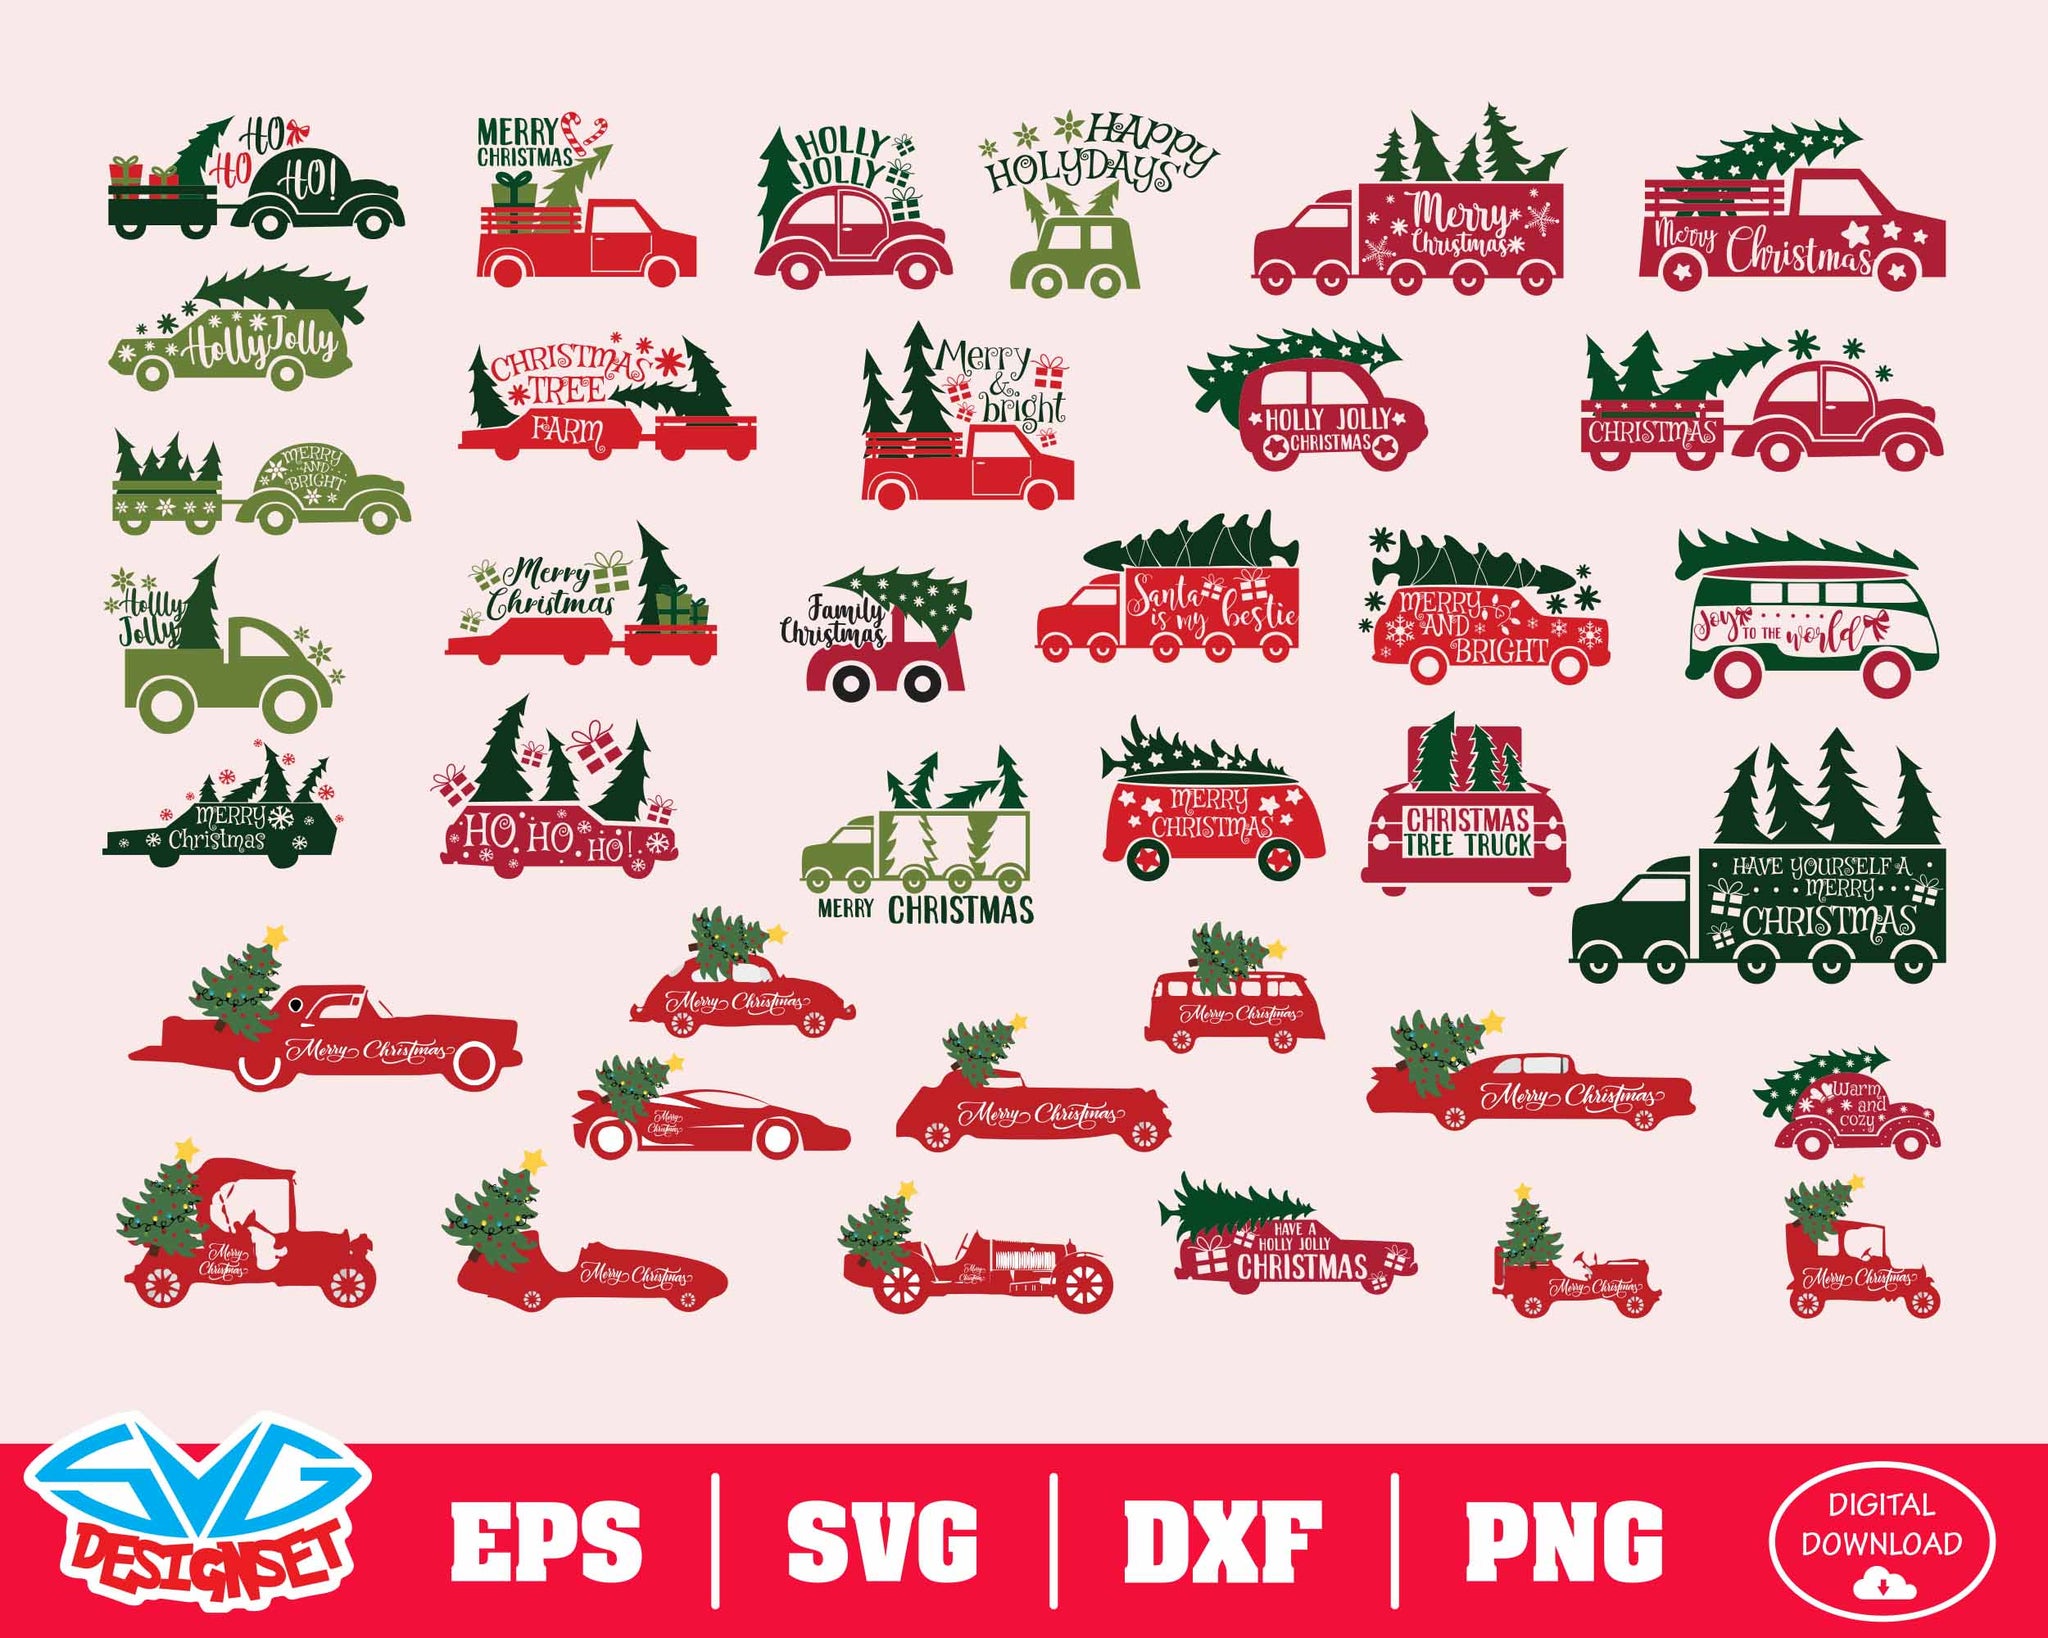 Christmas Car Svg, Dxf, Eps, Png, Clipart, Silhouette and Cutfiles #2 - SVGDesignSets